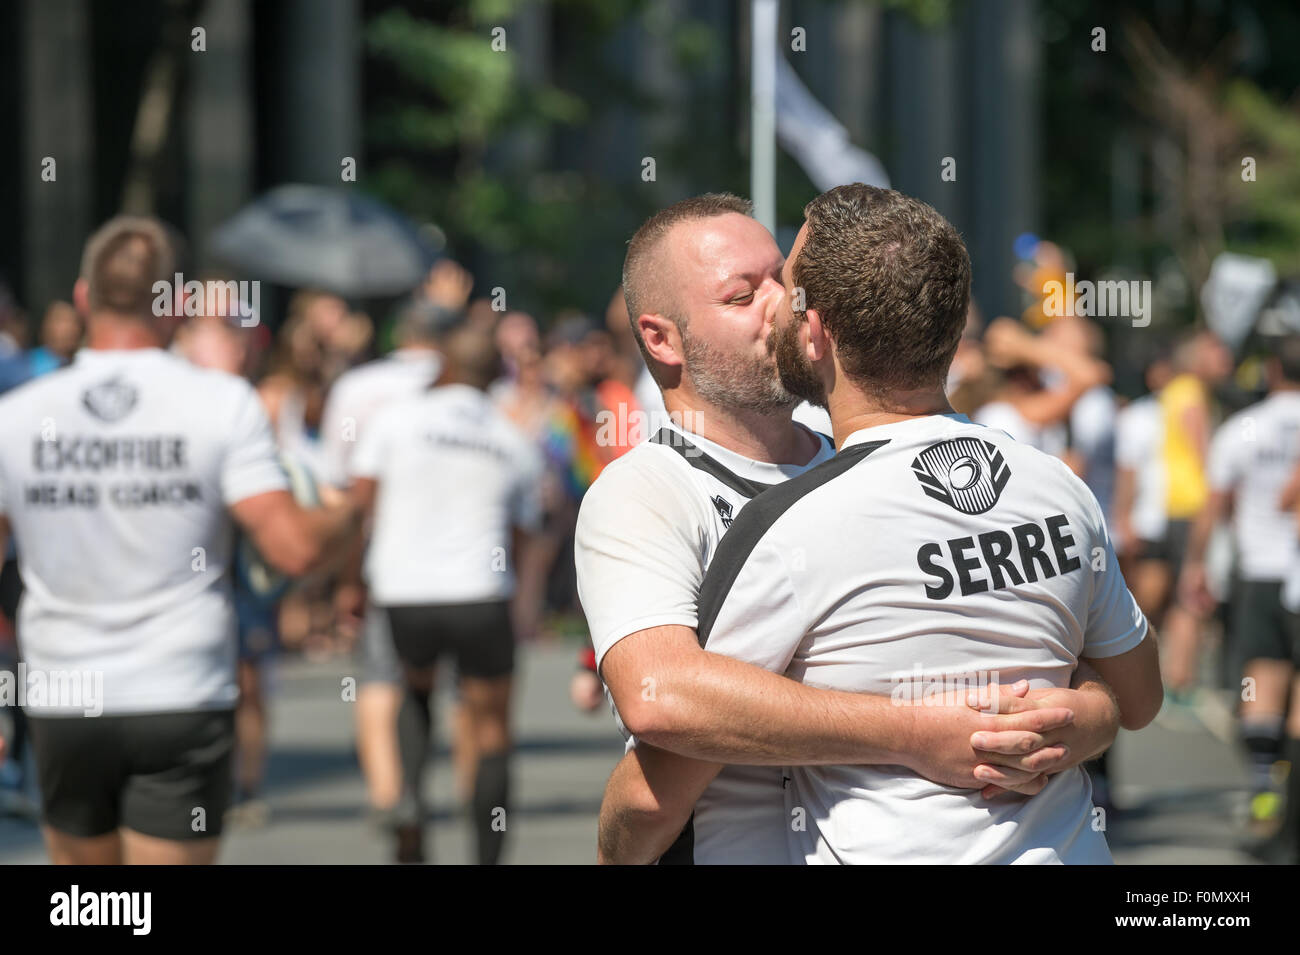 MONTREAL, CANADA, 16th August 2015. Two men from the gay rugby team are kissing at the 2015 Gay Pride Parade in Montreal. © Marc Bruxelle/Alamy Live News Stock Photo